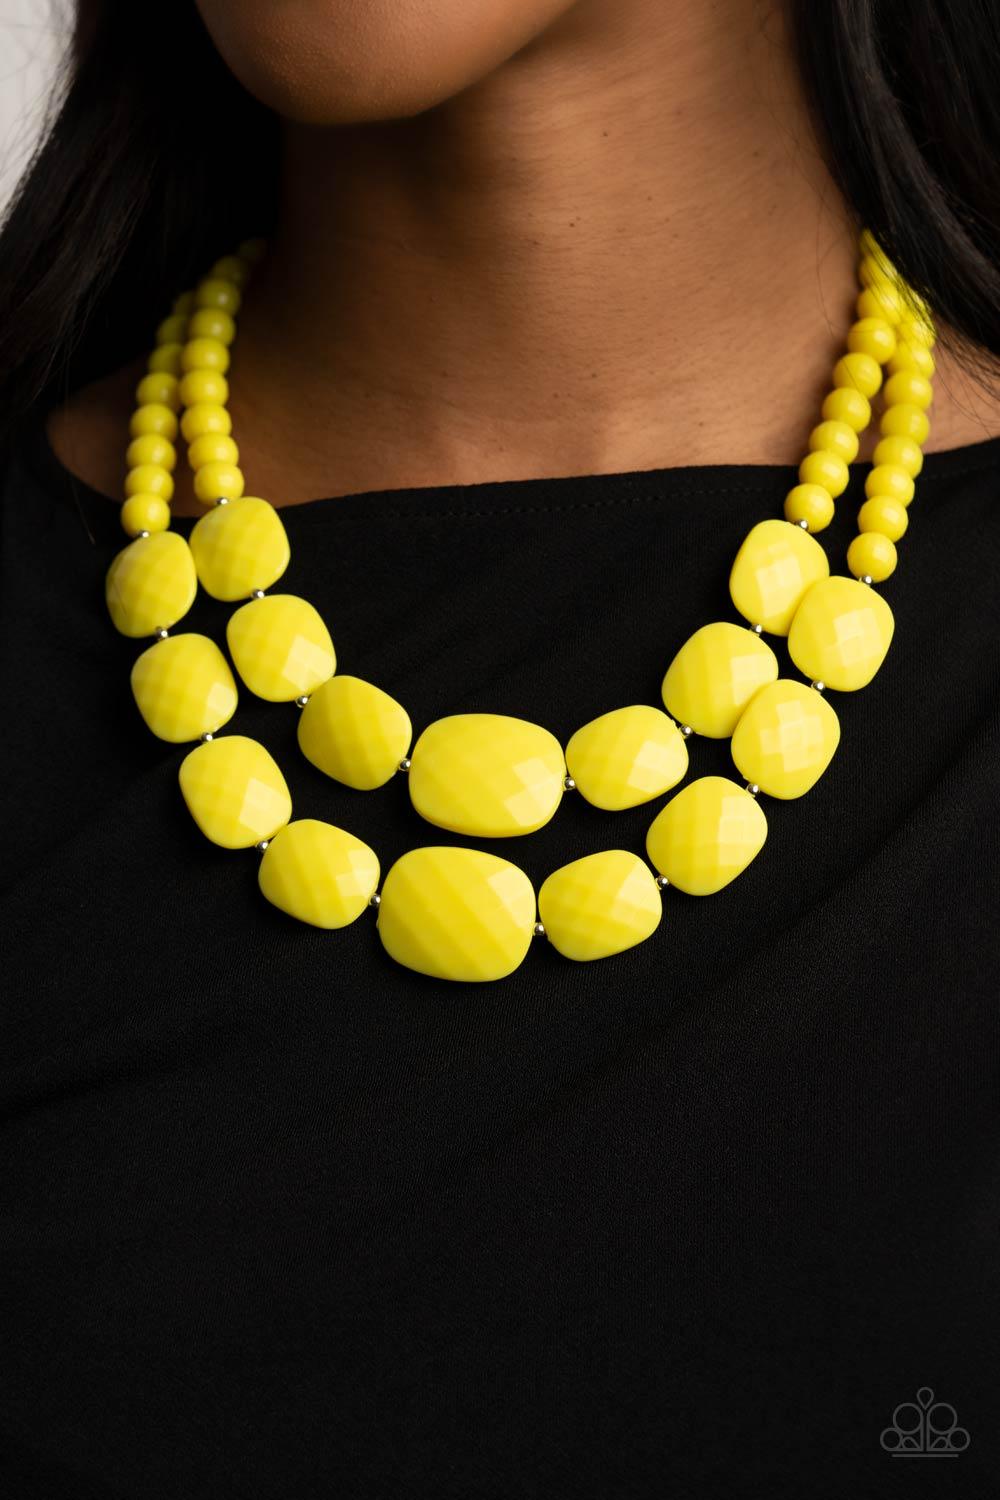 Paparazzi Accessories Resort Ready - Yellow Featuring square facets, strands of shimmery Illuminating beads give way to an oversized collection of flattened Illuminating beads. Featuring faceted surfaces, the asymmetrical beads catch and reflect the light